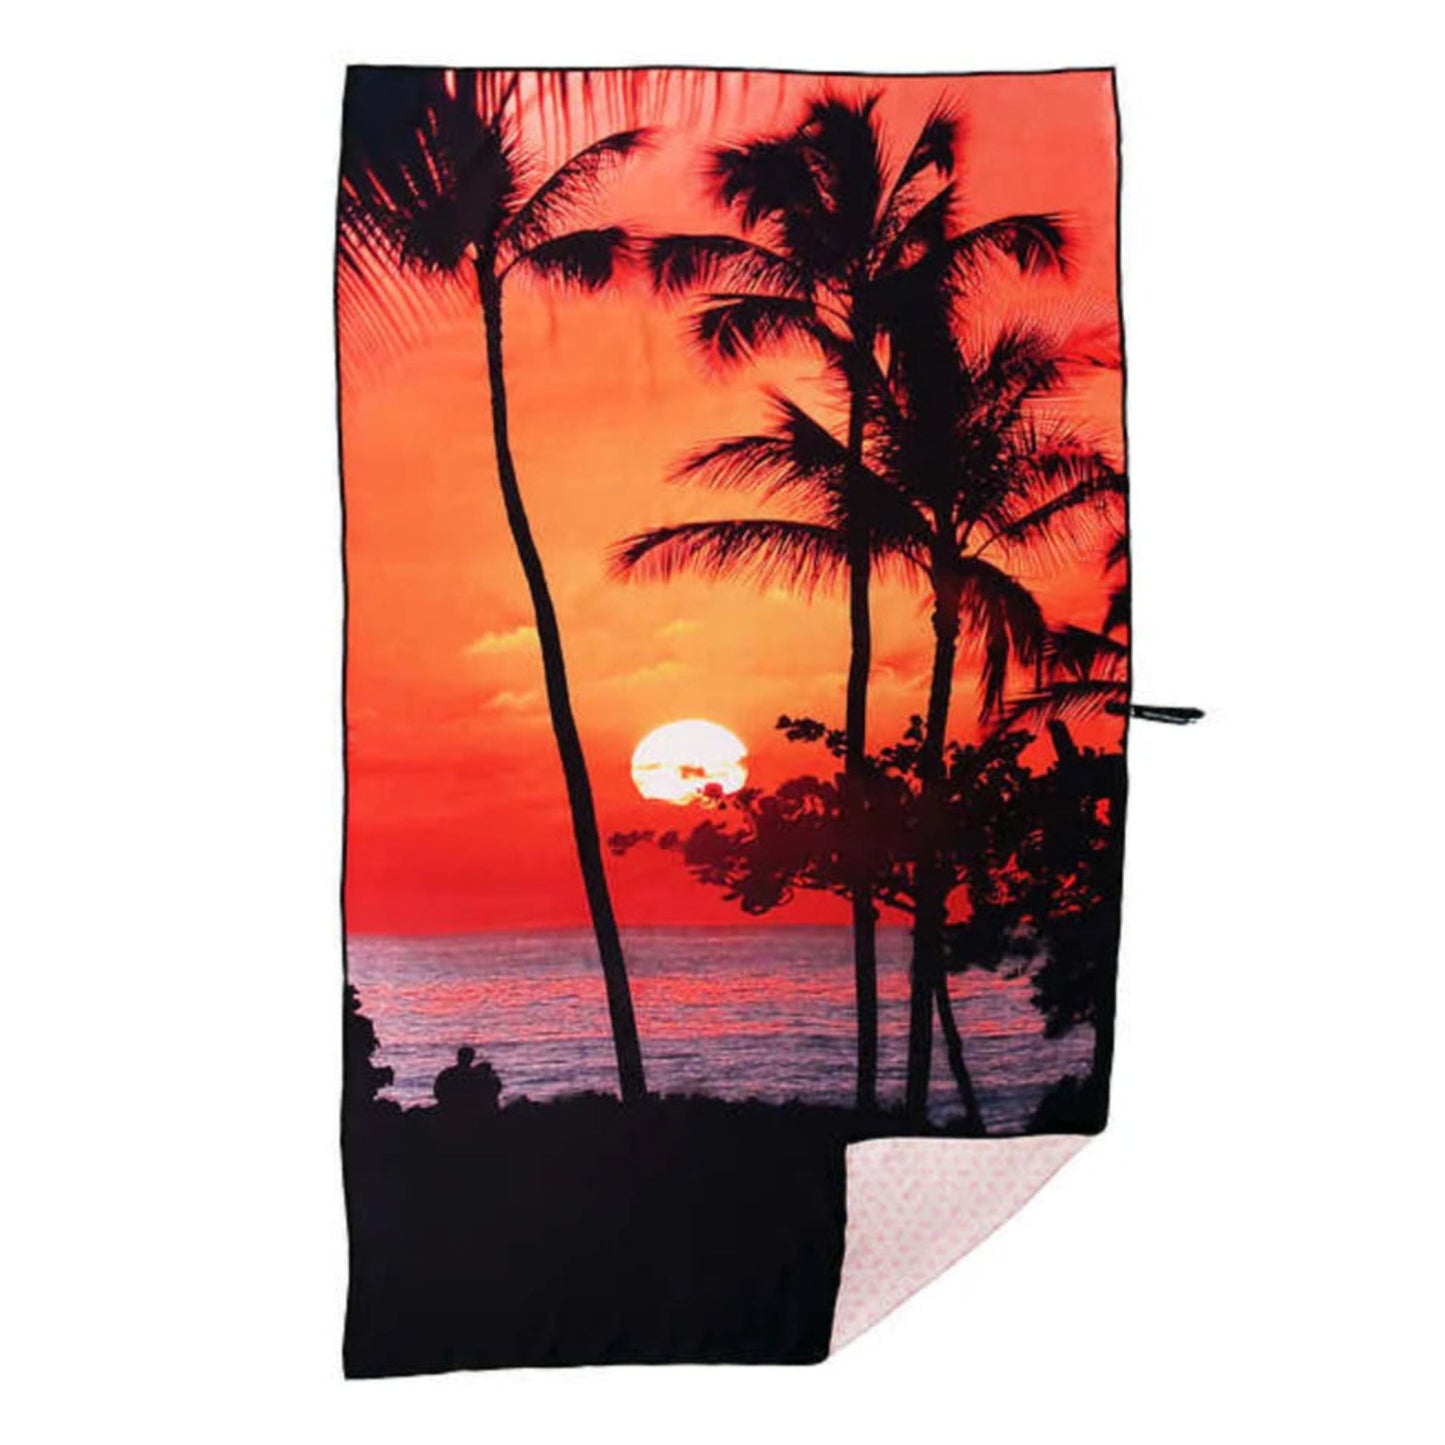 Whitley Willows-Whitley Willows Microfiber Beach Towels- 35 x70 - Comapact, Lighweight, Quick Dry, Extra Absorbent, Super Soft - Good for Beach, Pool, Yoga, Travel and Camping (Sunset) - Brandat Outlet